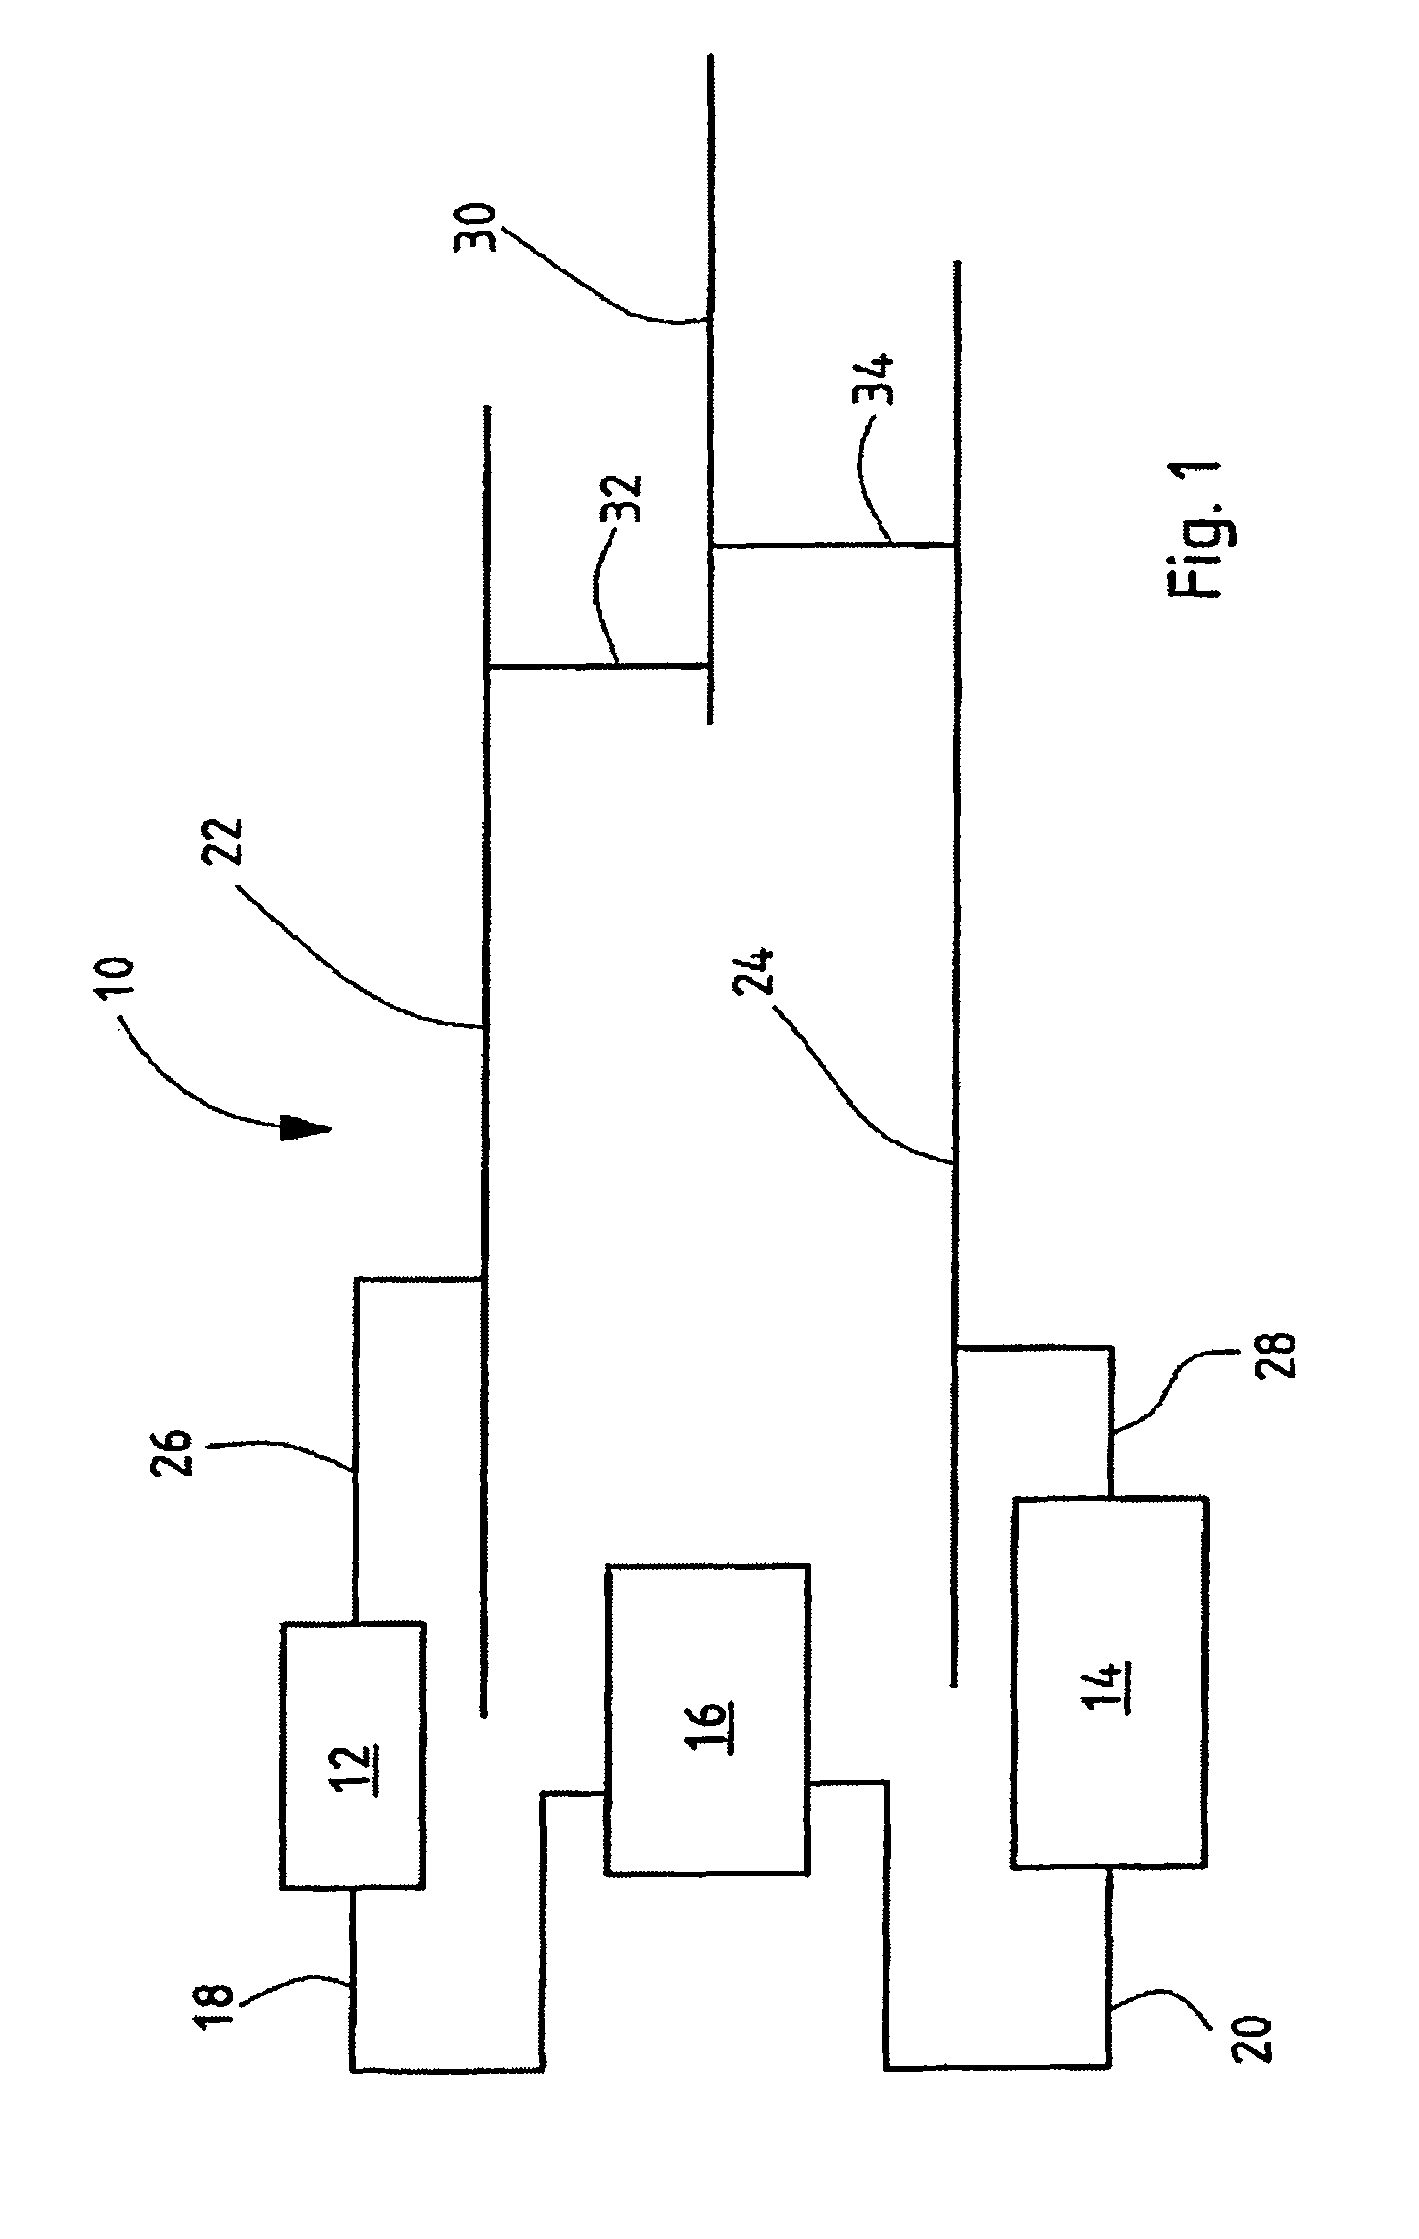 Drive system for a vehicle